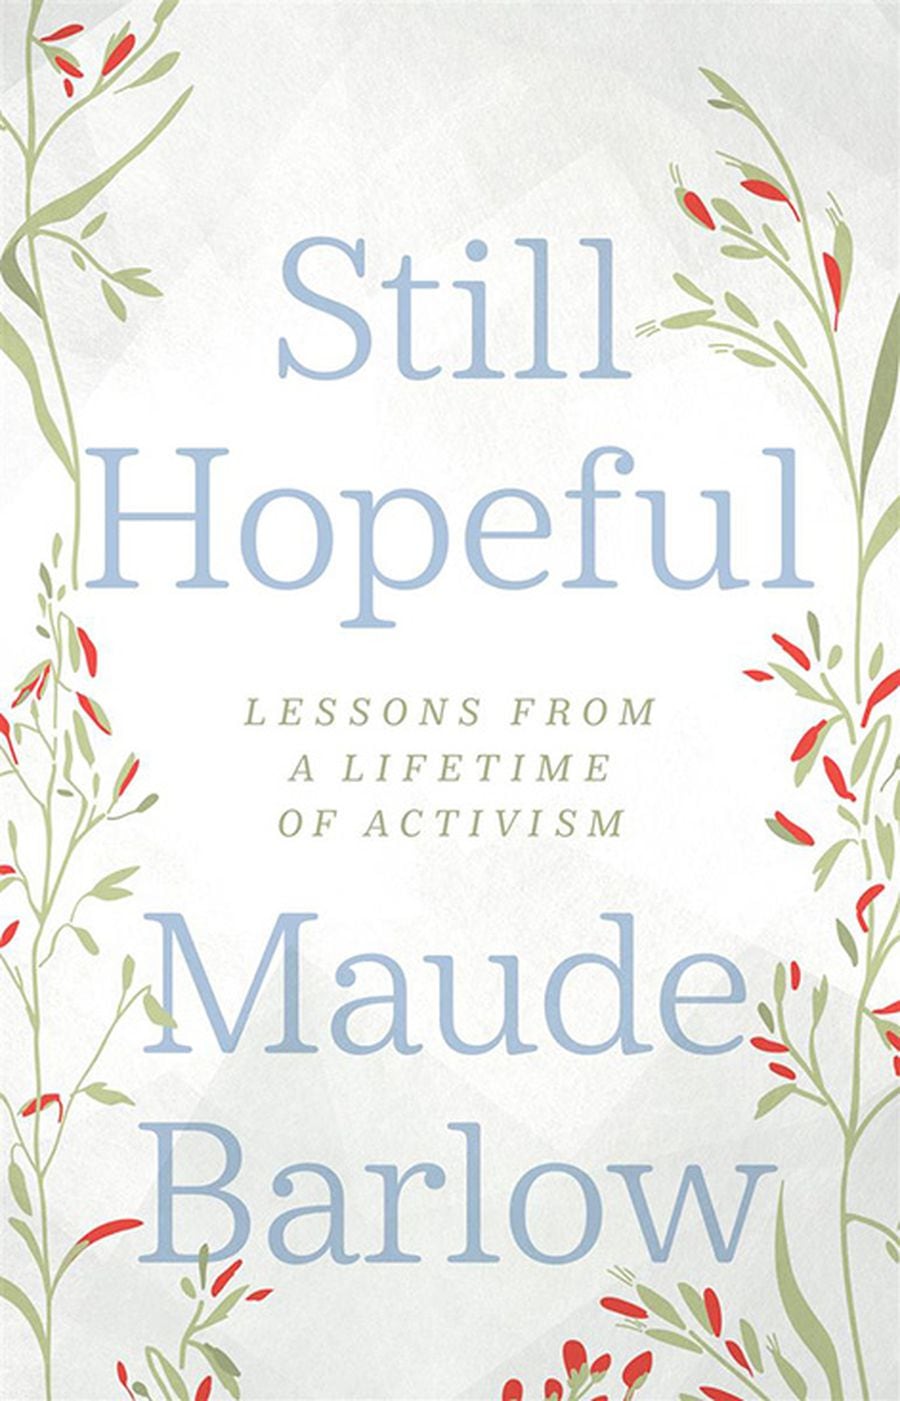 Still Hopeful: Lessons from a Lifetime of Activism